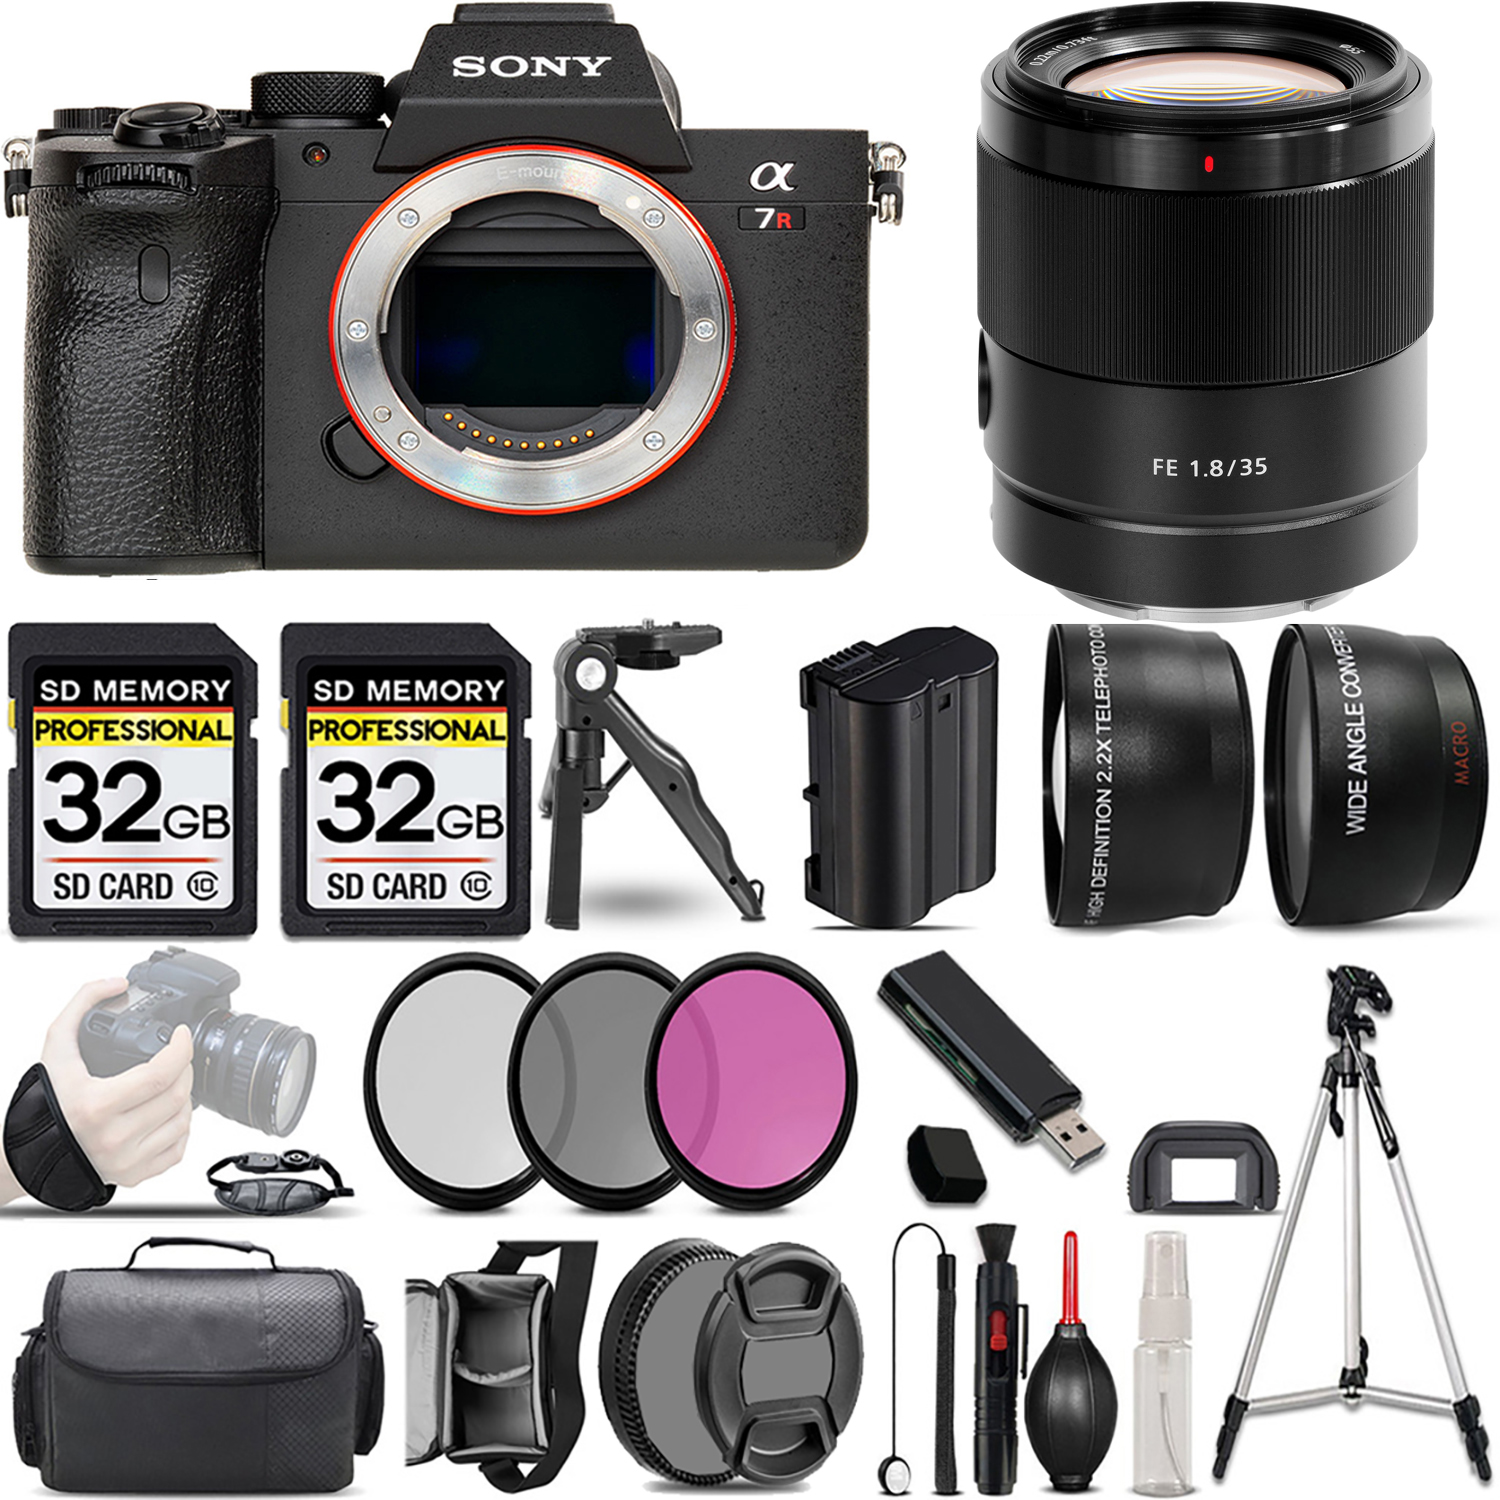 a7R IVA Mirrorless Camera + 35mm Lens + 3 Piece Filter Set + 64GB + Bag & More! *FREE SHIPPING*